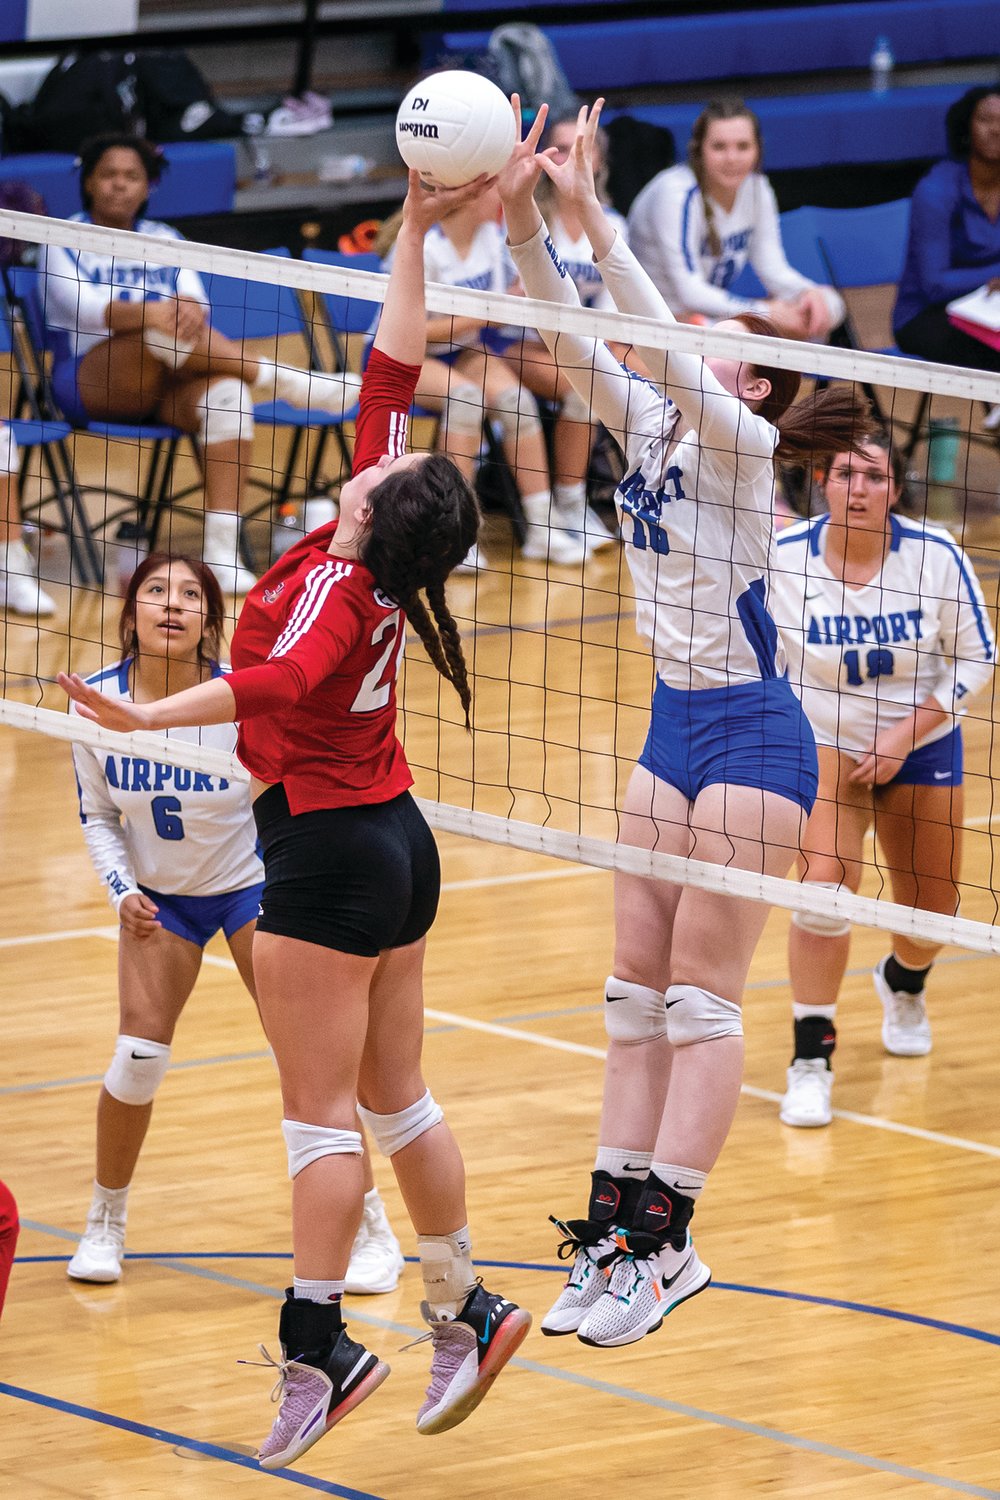 Net action between Airport and Gilbert in the Sept. 20 match won by the Lady Indians